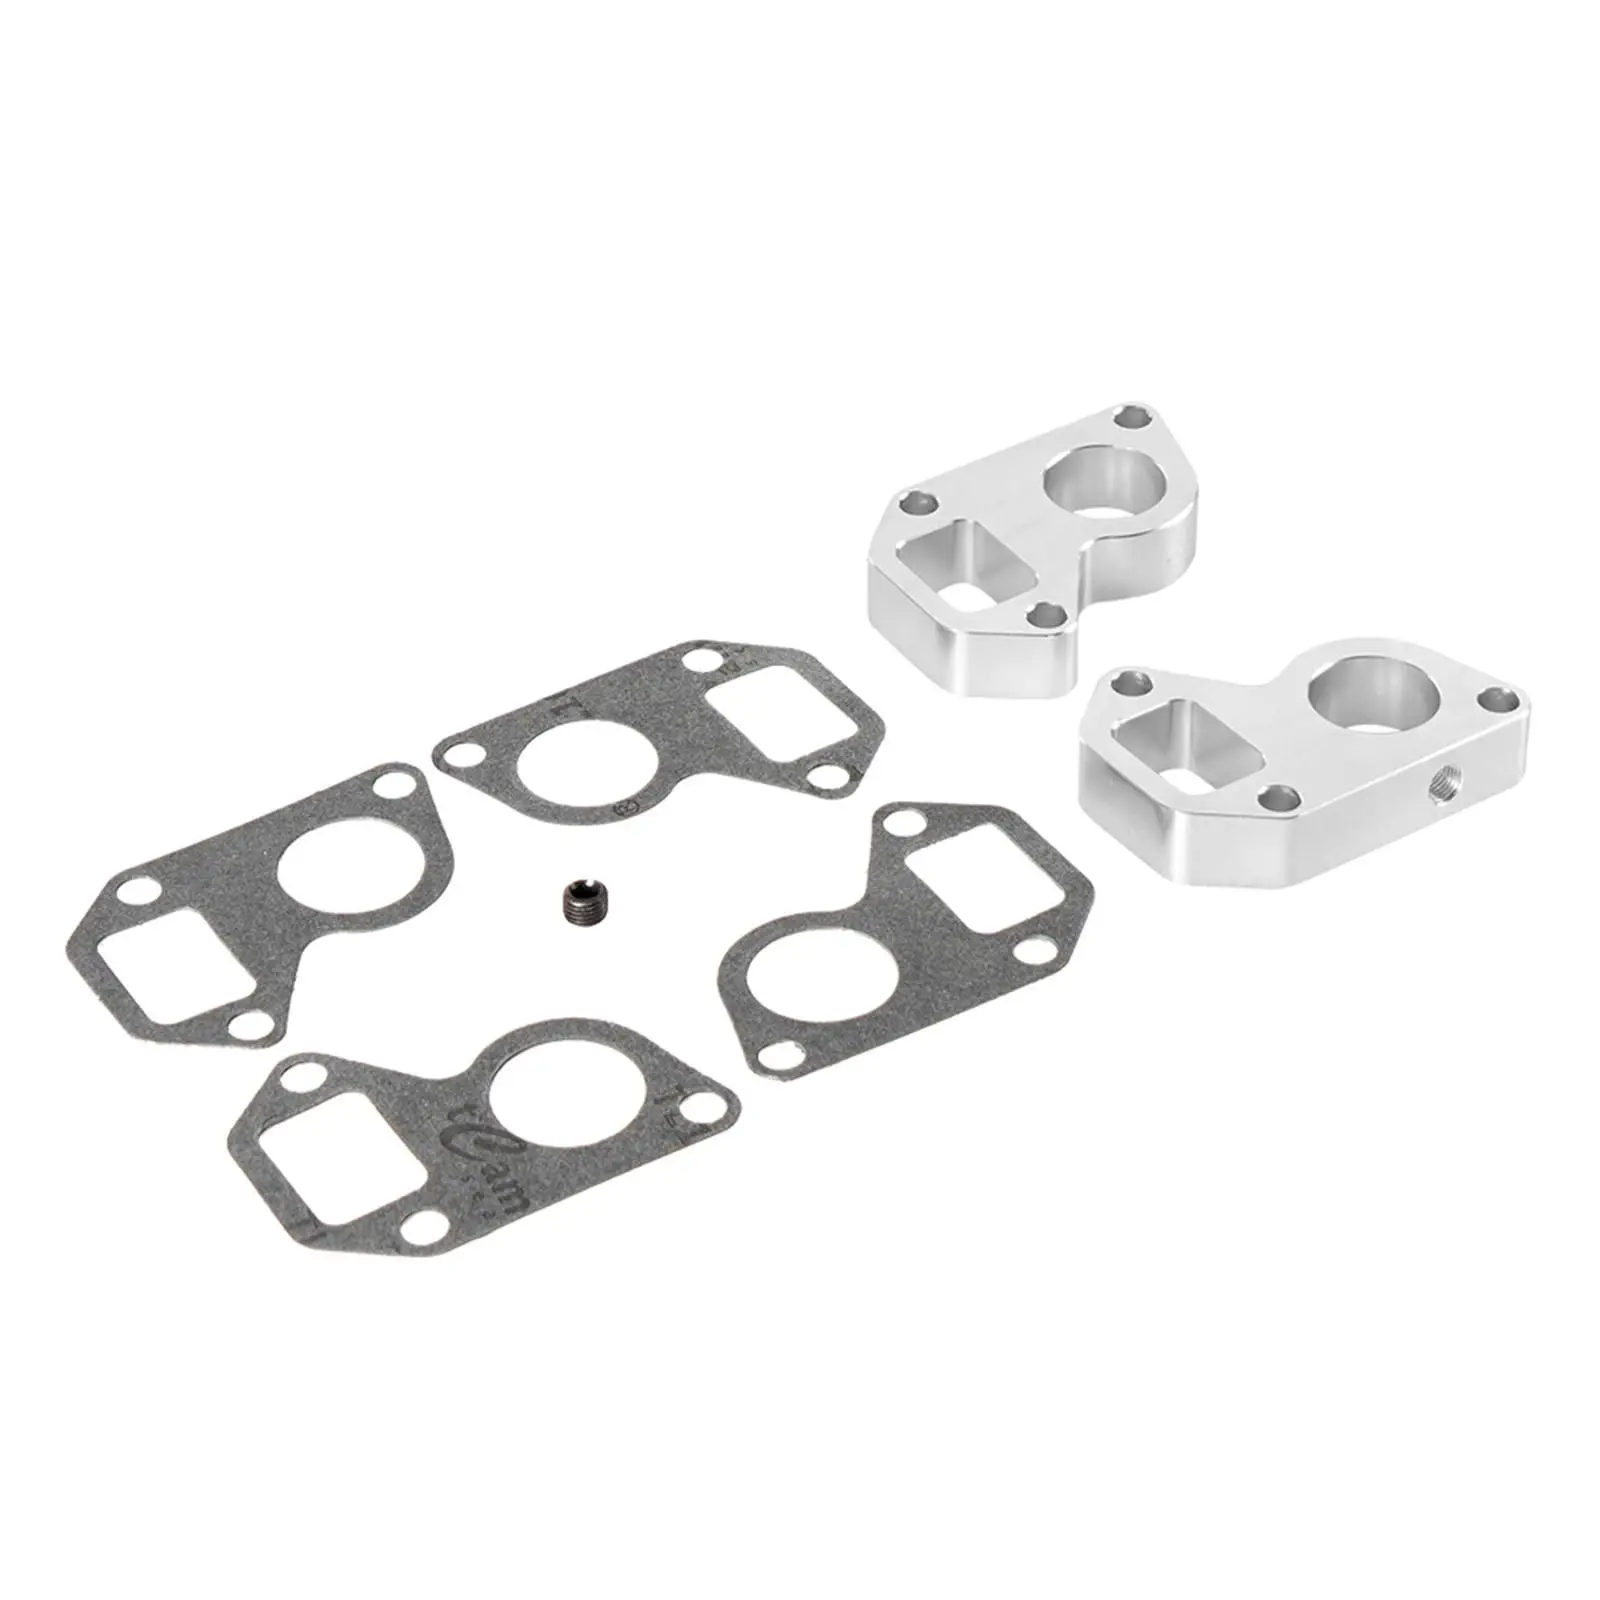 Water Pump Spacer Truck Adapter for Replace Accessories